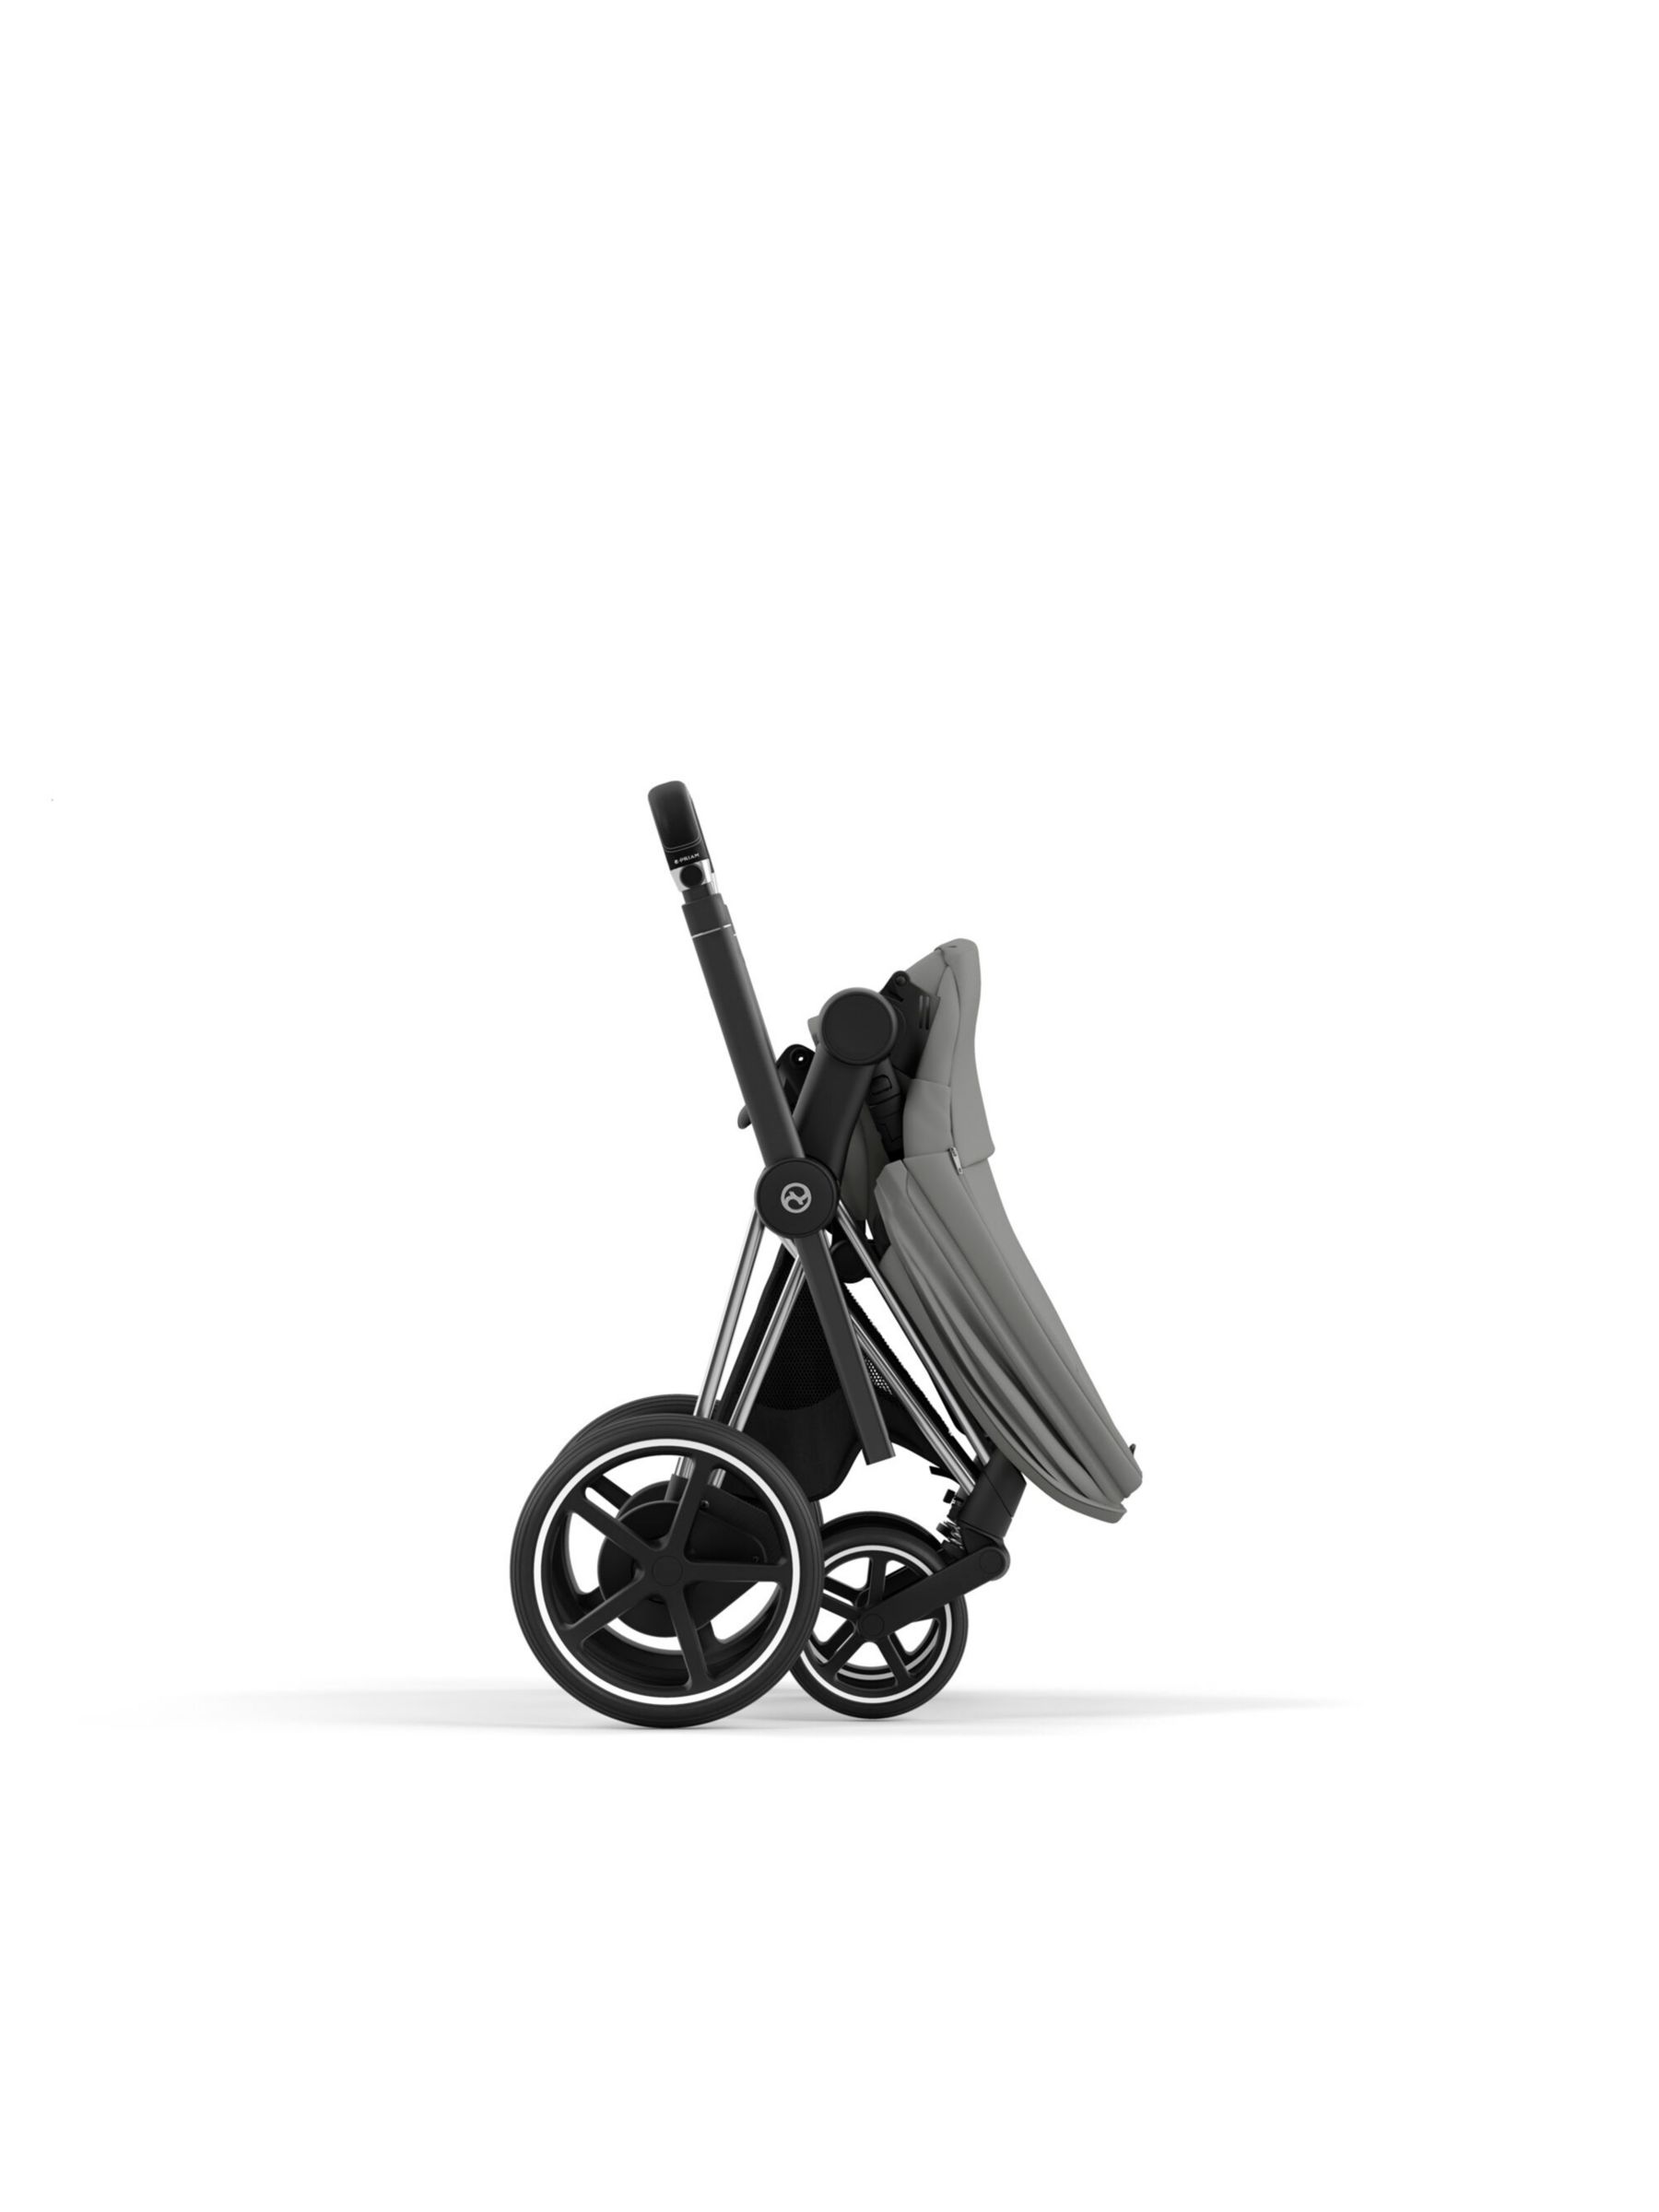 Cybex e-Priam Pushchair Chassis & Seat Pack Bundle, Black/ Mirage Grey